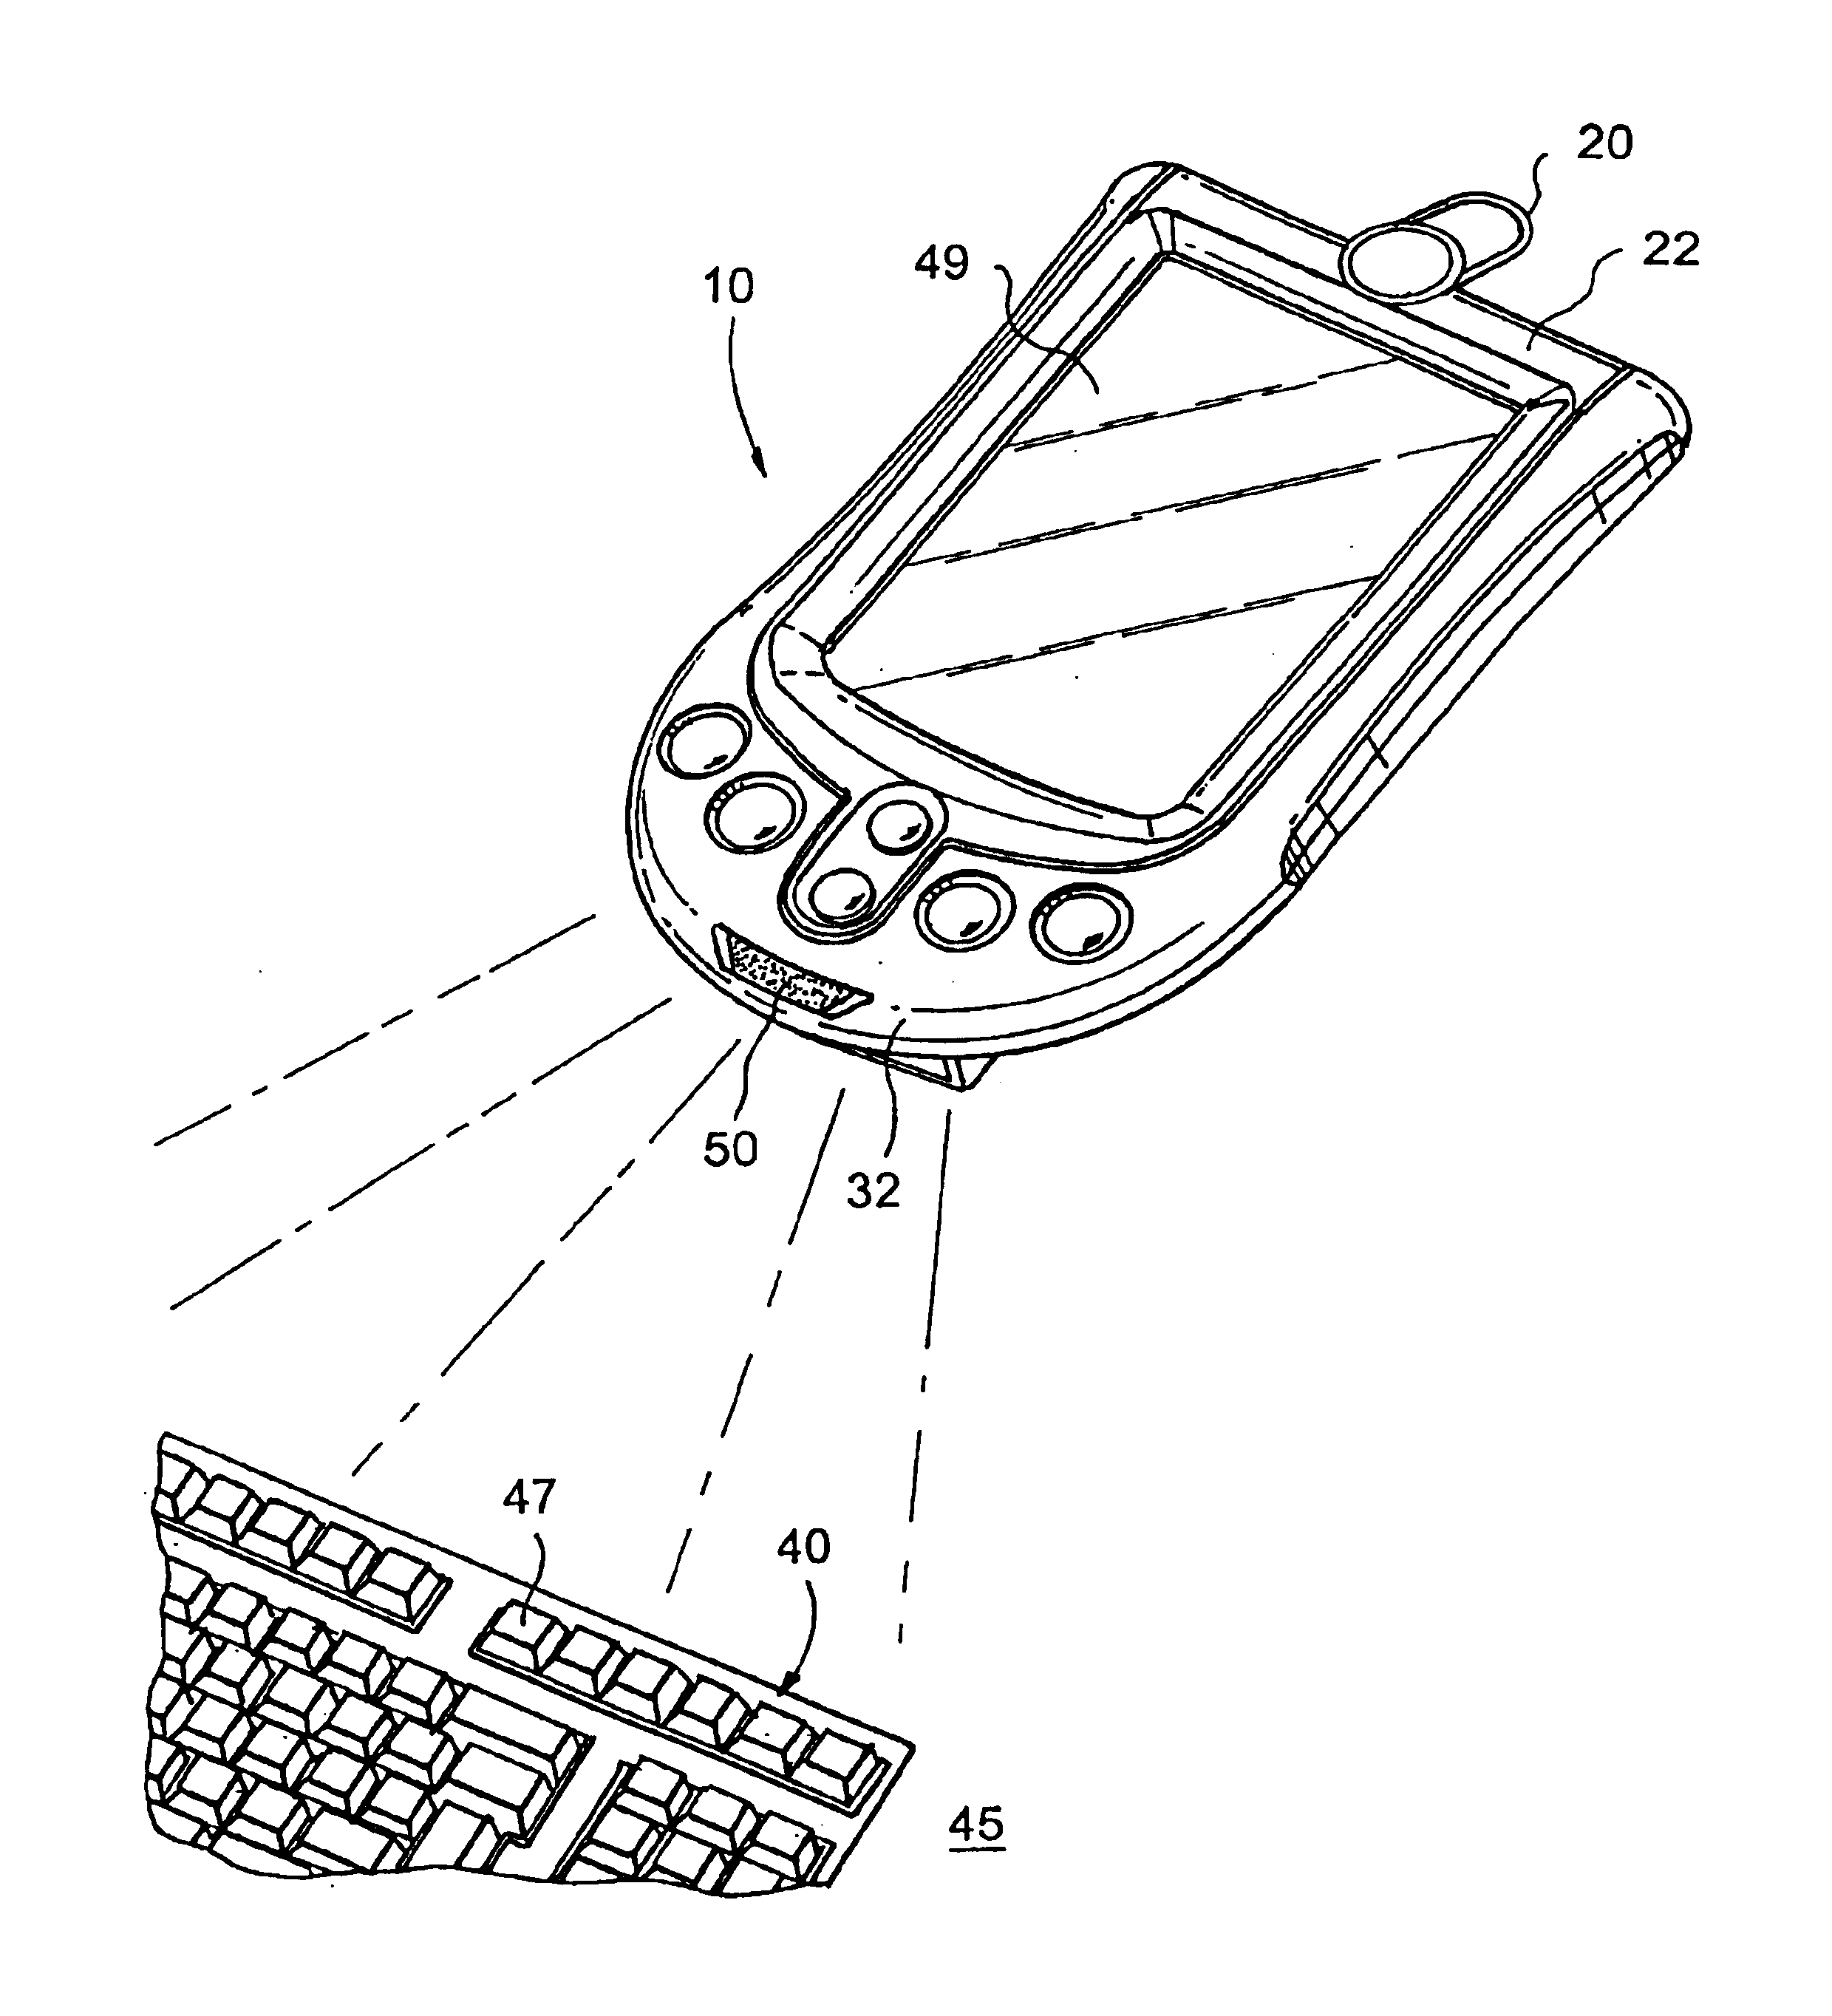 User input method and apparatus for handheld computers